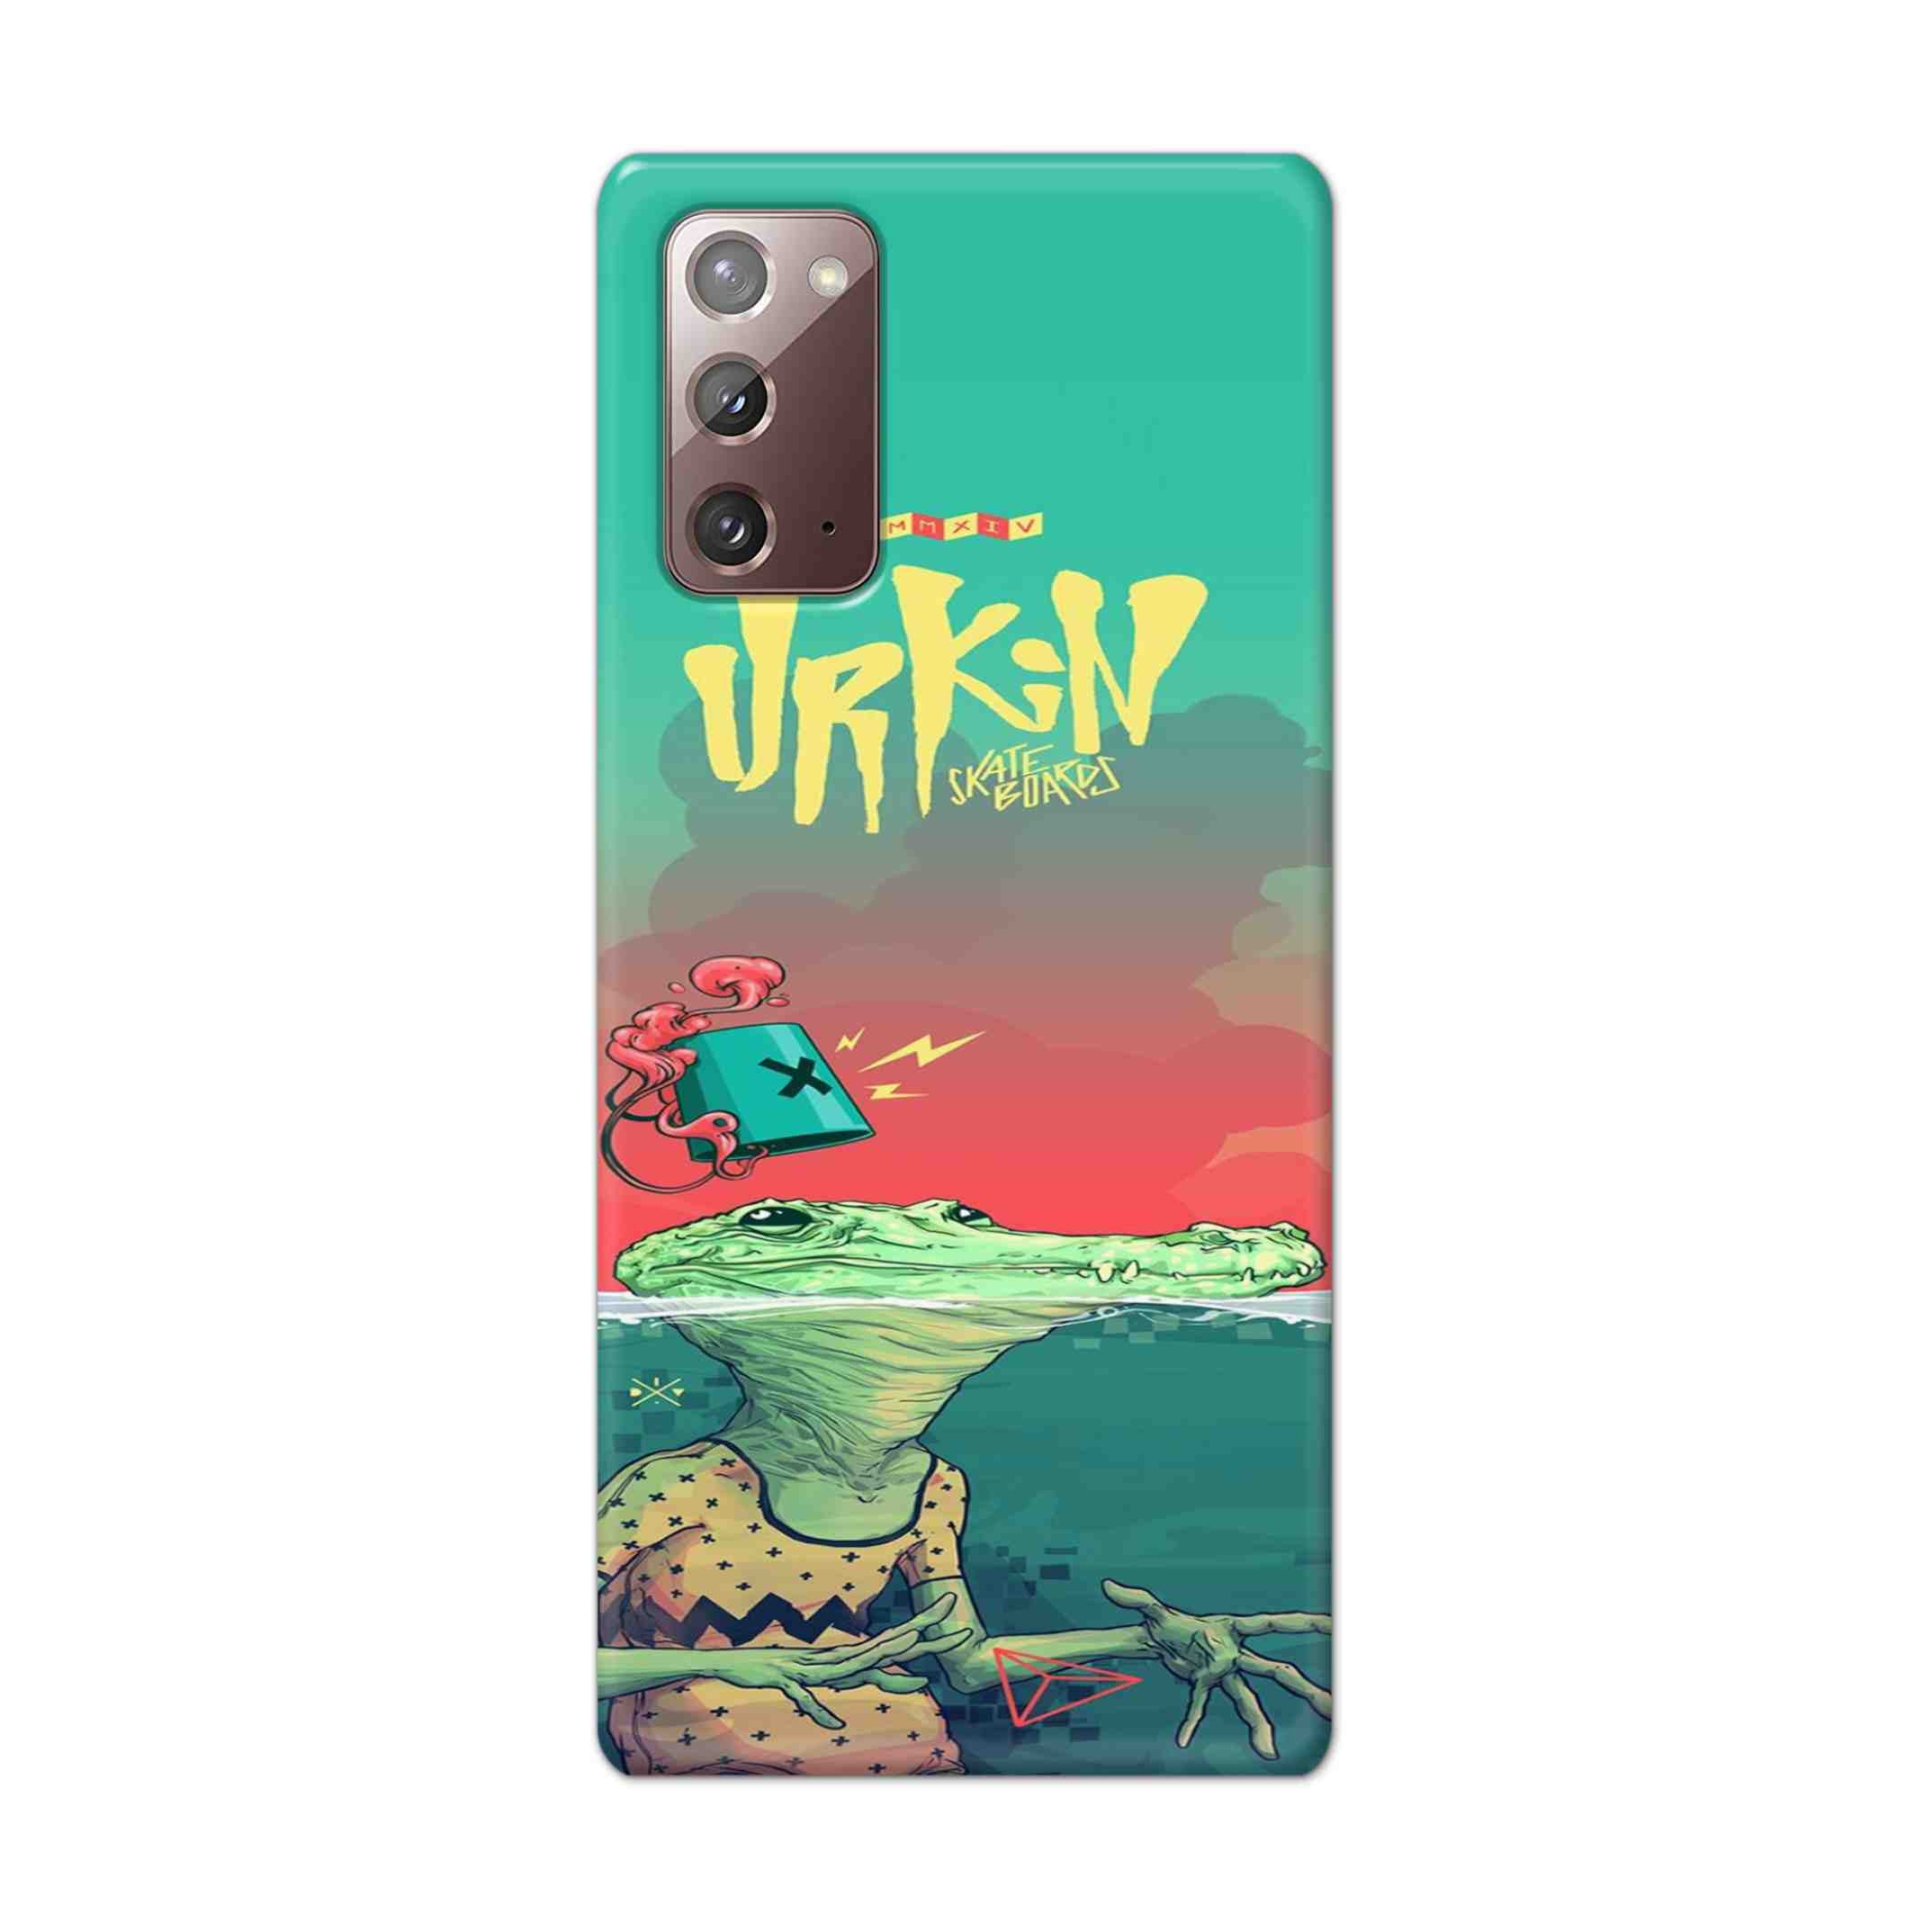 Buy Urkin Hard Back Mobile Phone Case Cover For Samsung Galaxy Note 20 Online